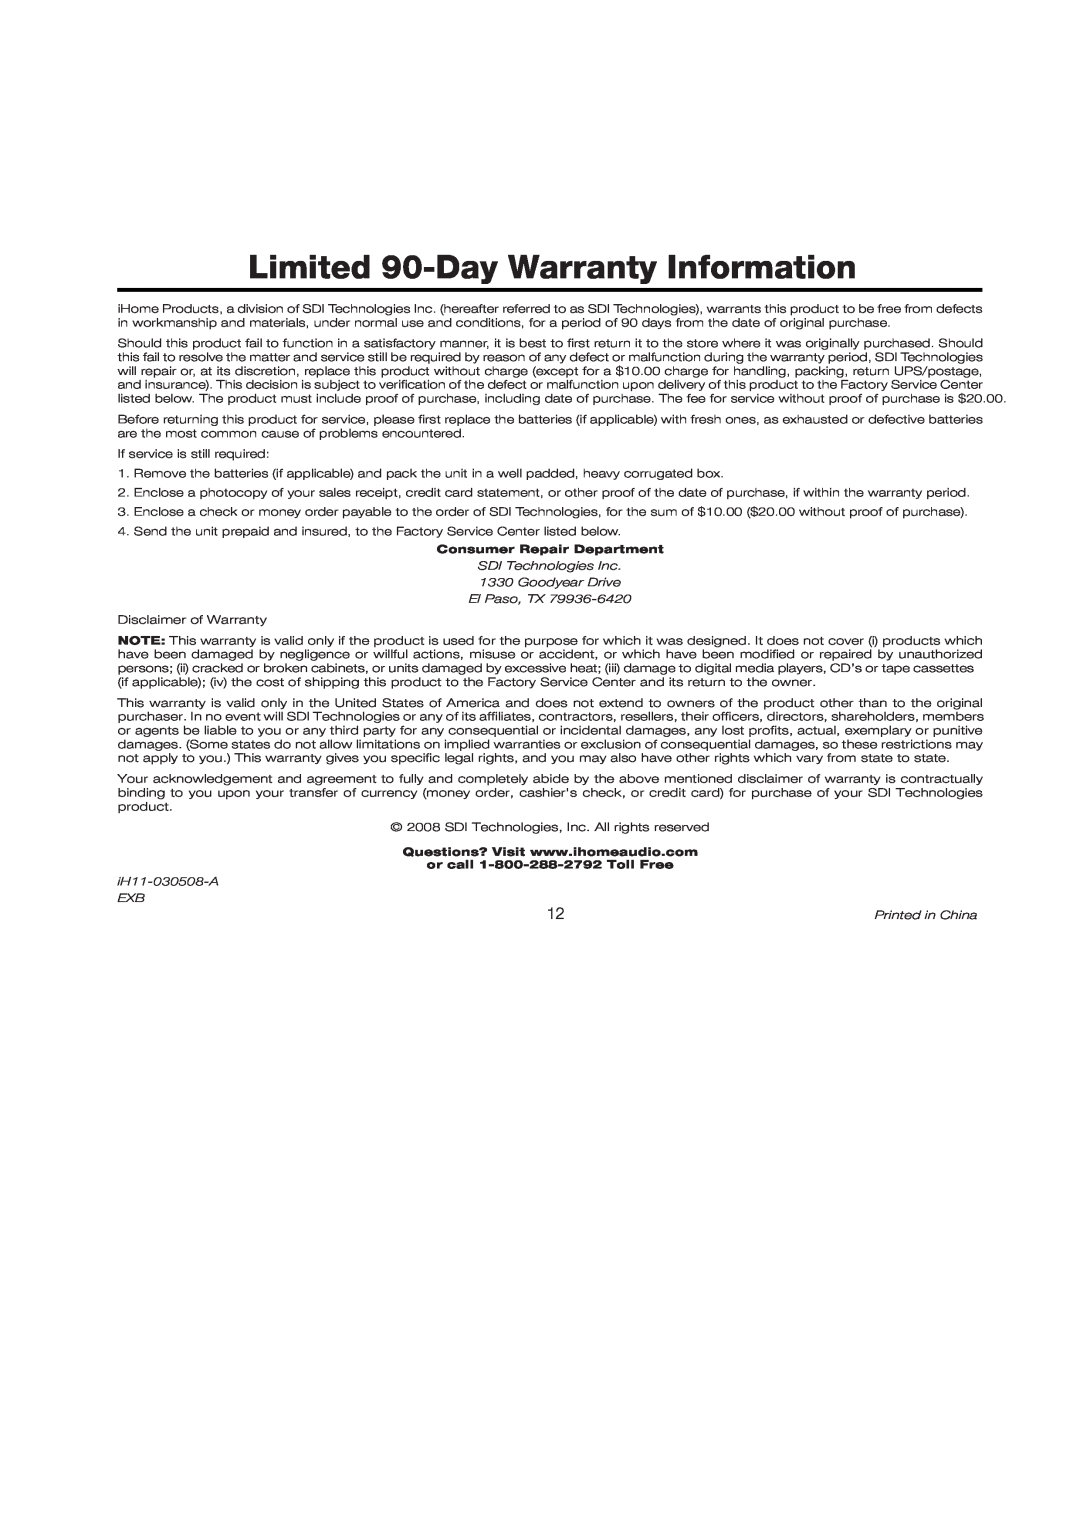 iHome iH11 manual Limited 90-Day Warranty Information, Consumer Repair Department, or call 1-800-288-2792 Toll Free 